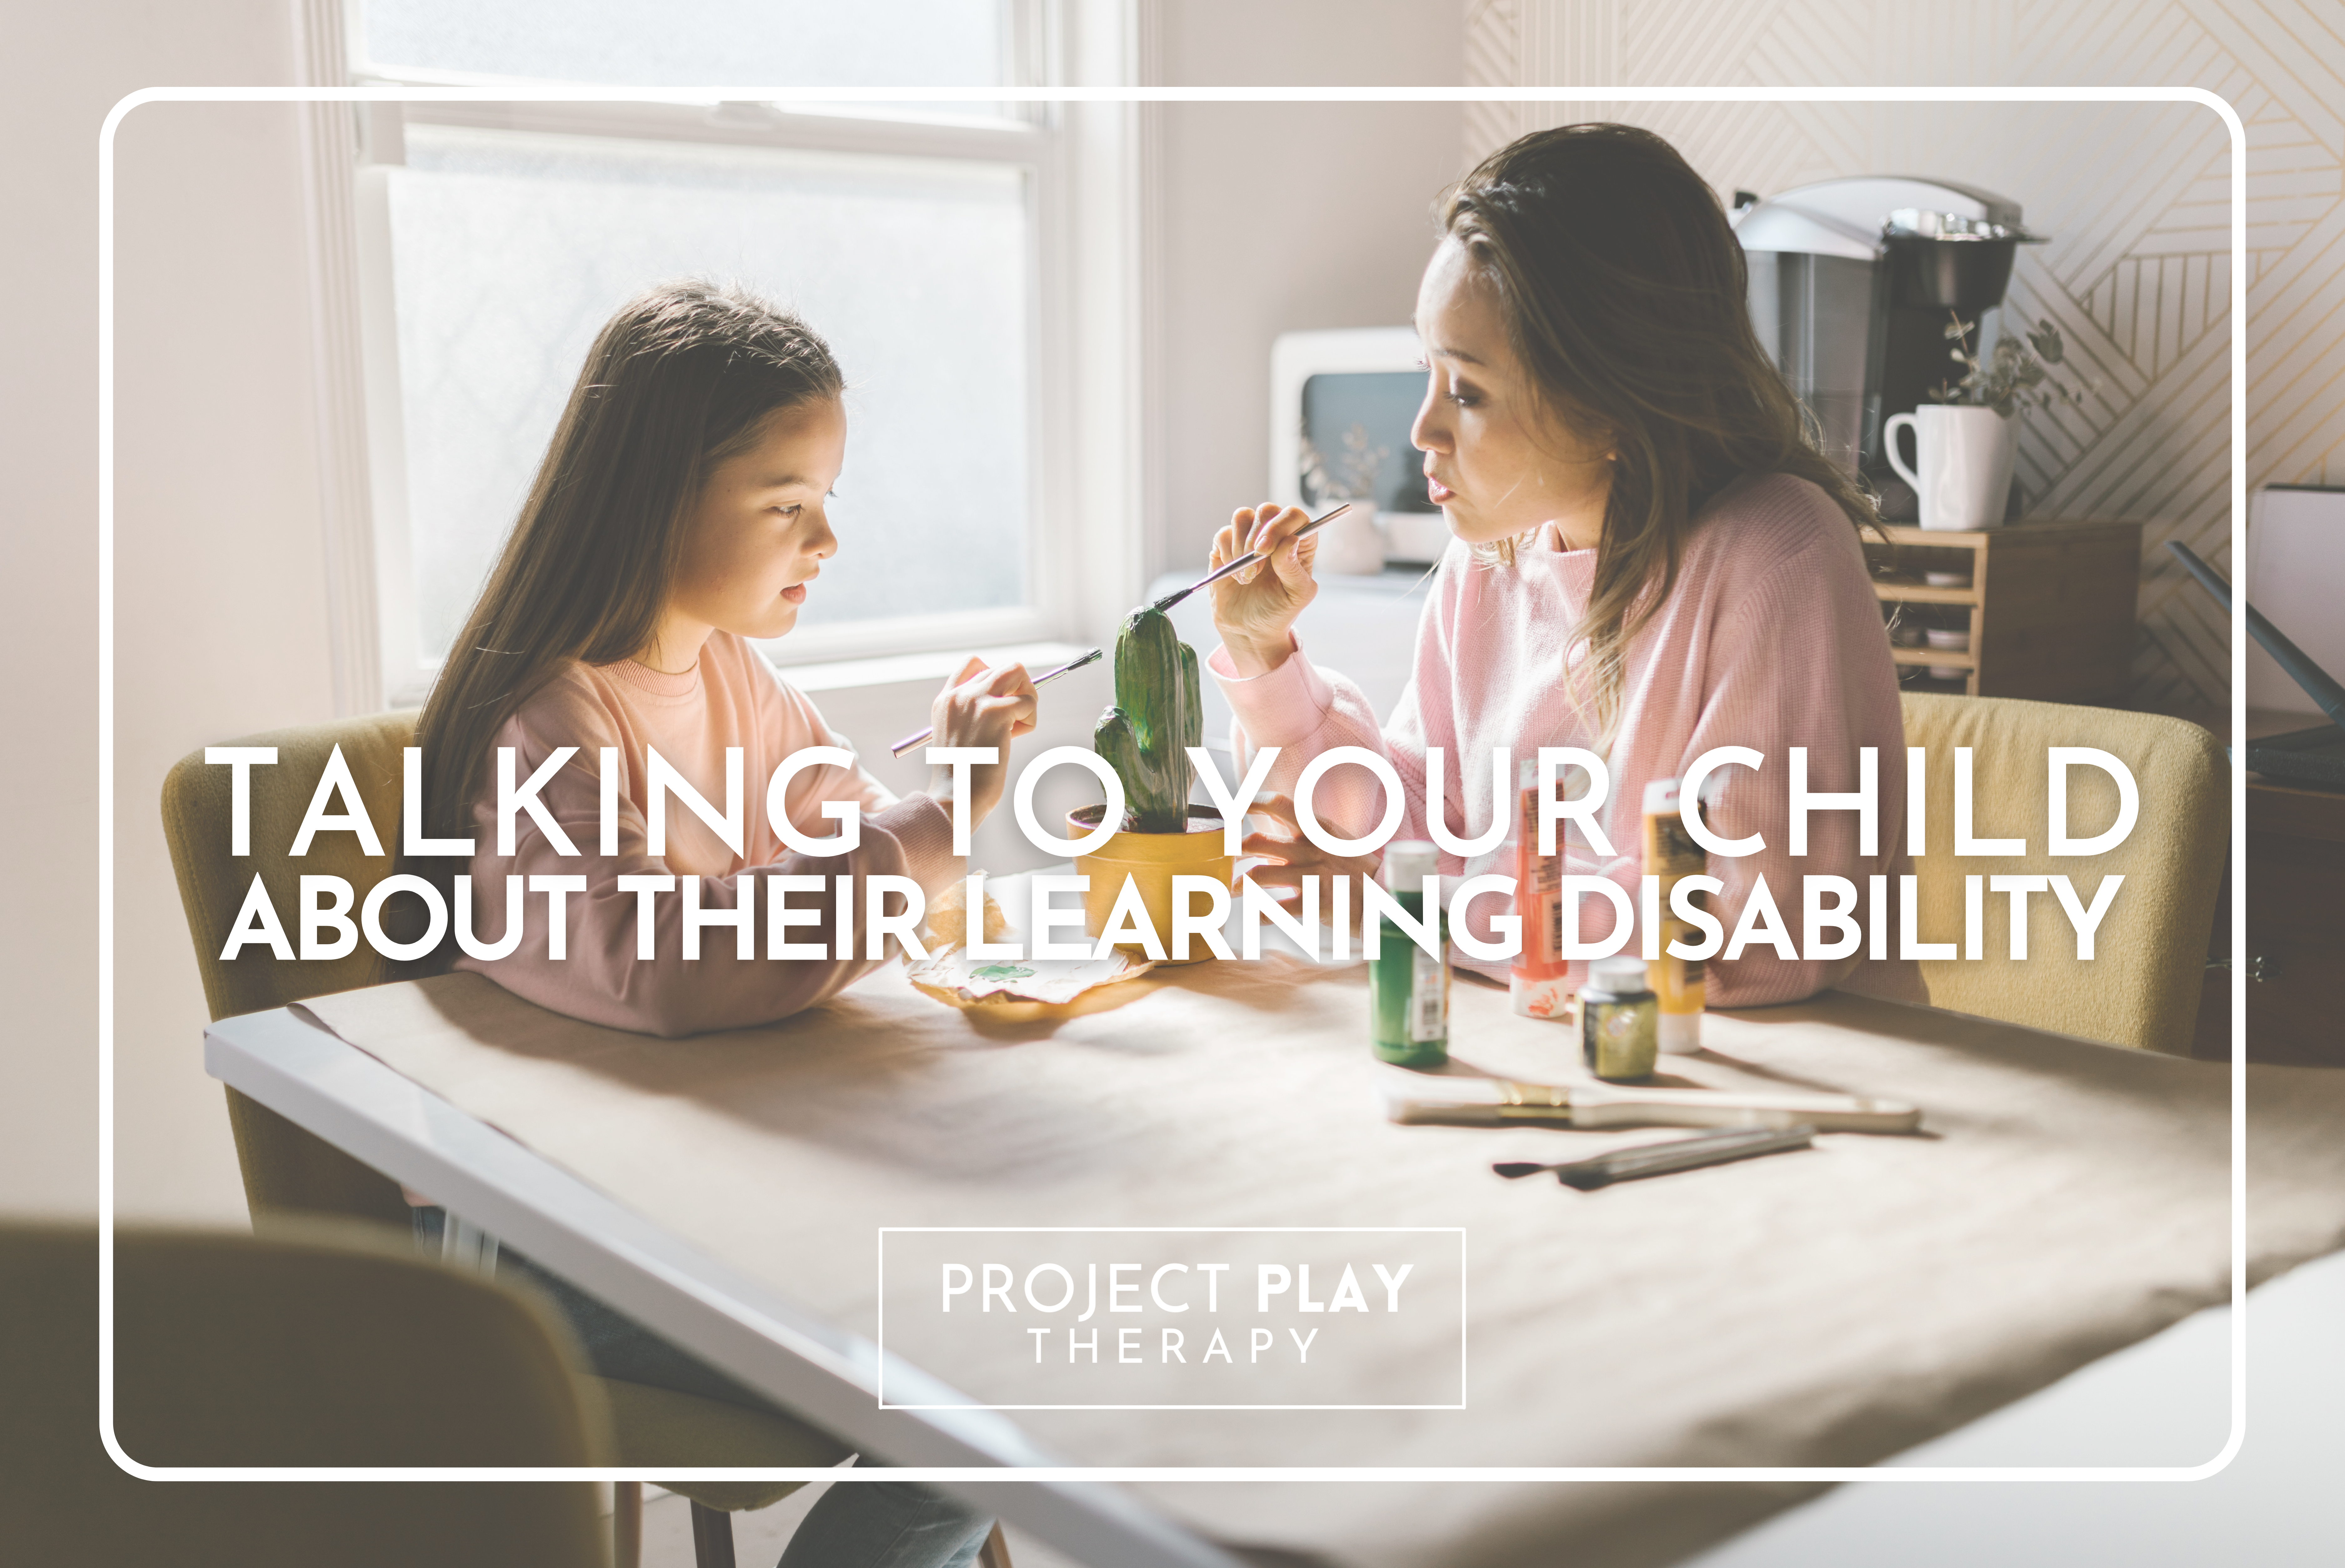 Talking to Your Child About Their Learning Disability